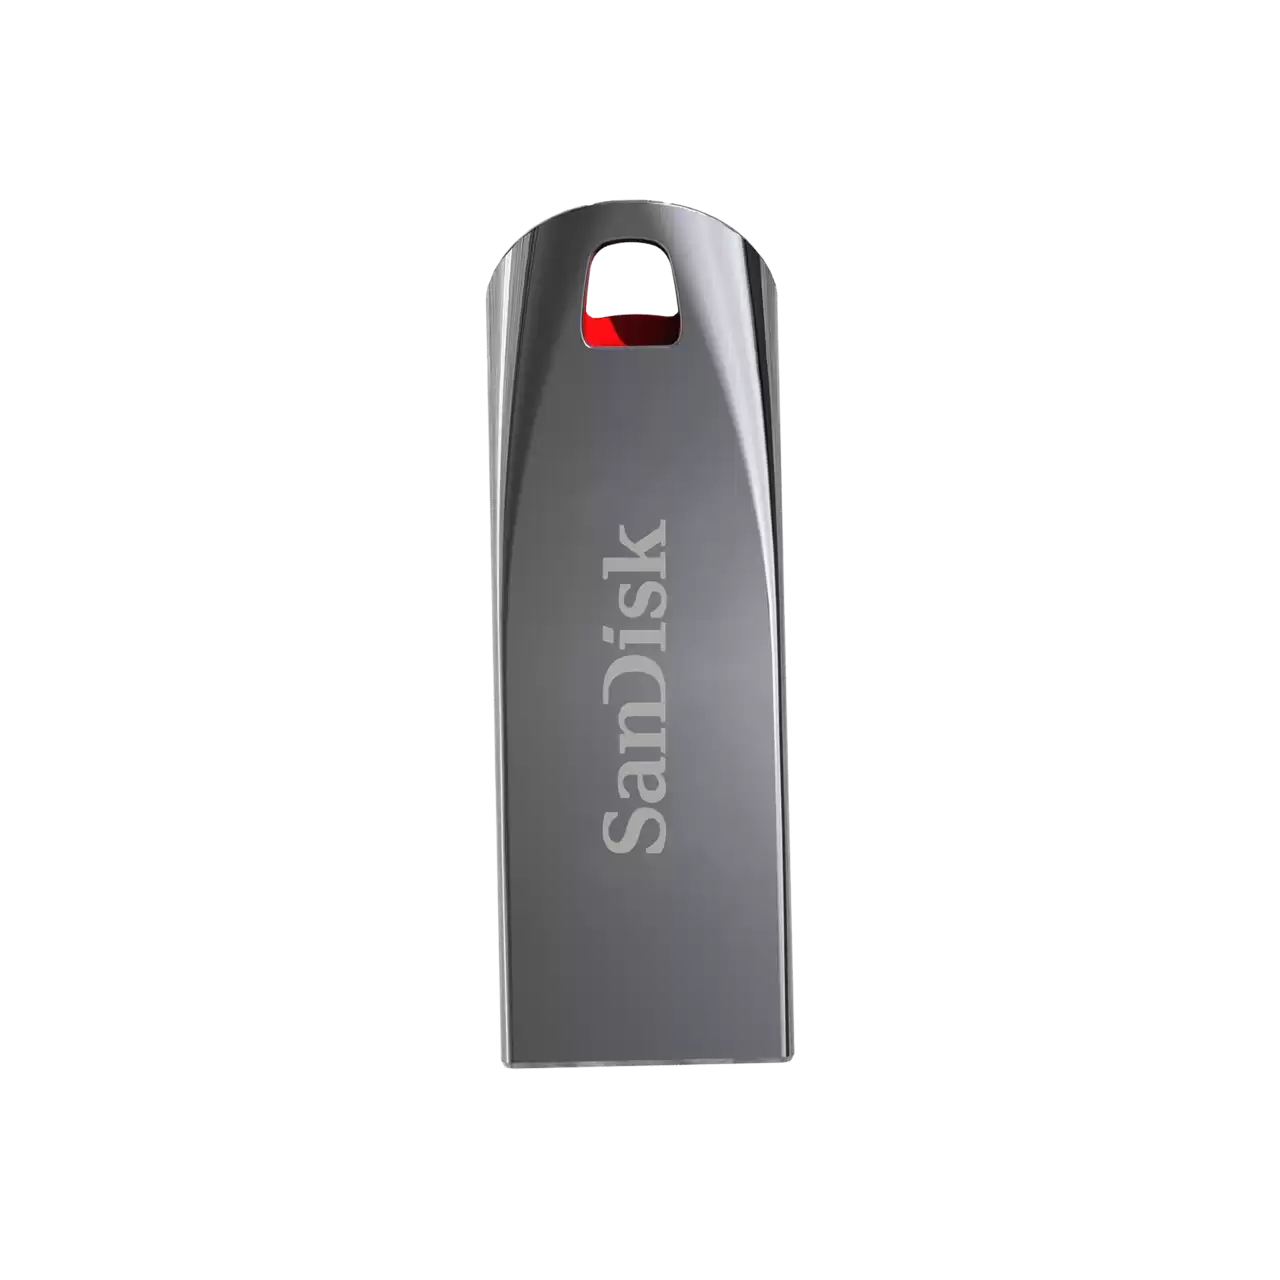 SanDisk Cruzer Force USB 2.0 Flash Drive with SanDisk SecureAccess™ software (16GB, 32GB, 64GB)